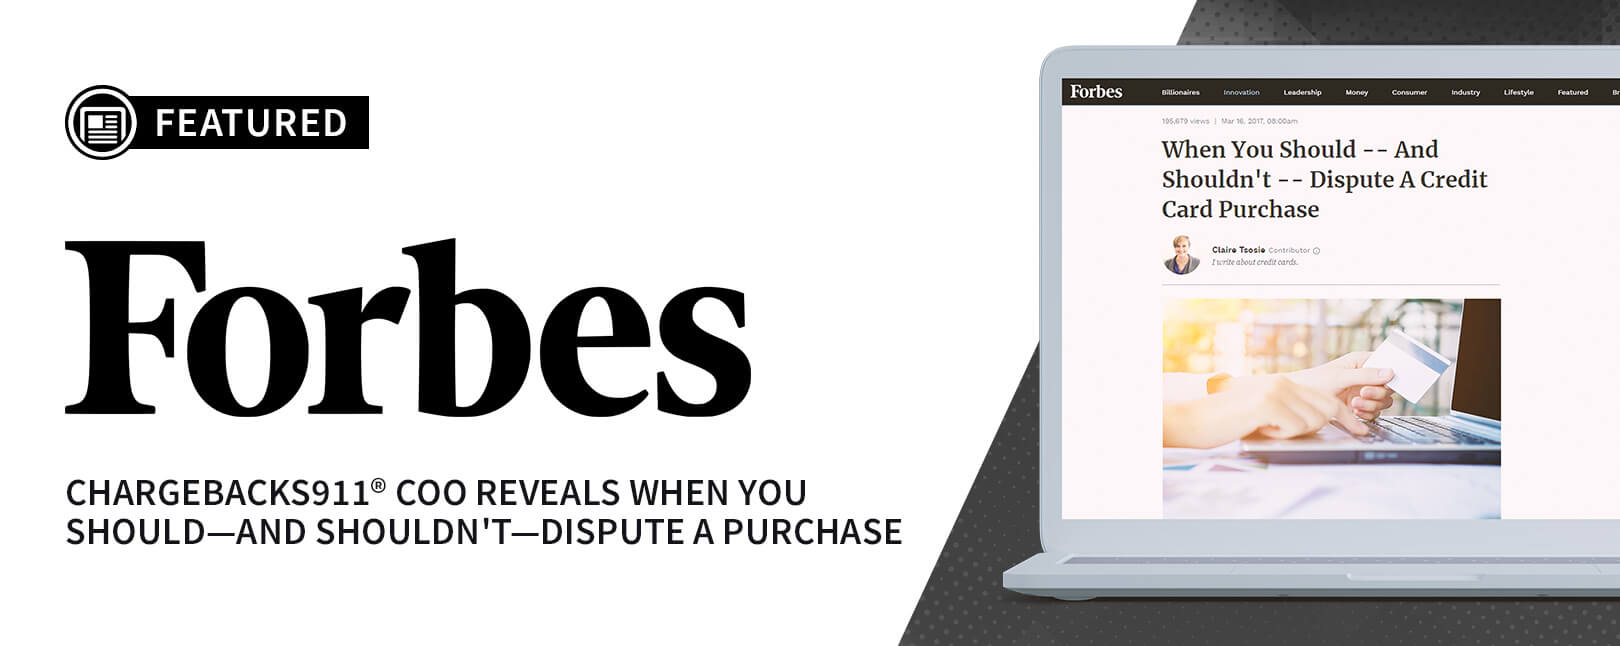 Consumer Chargebacks for Forbes